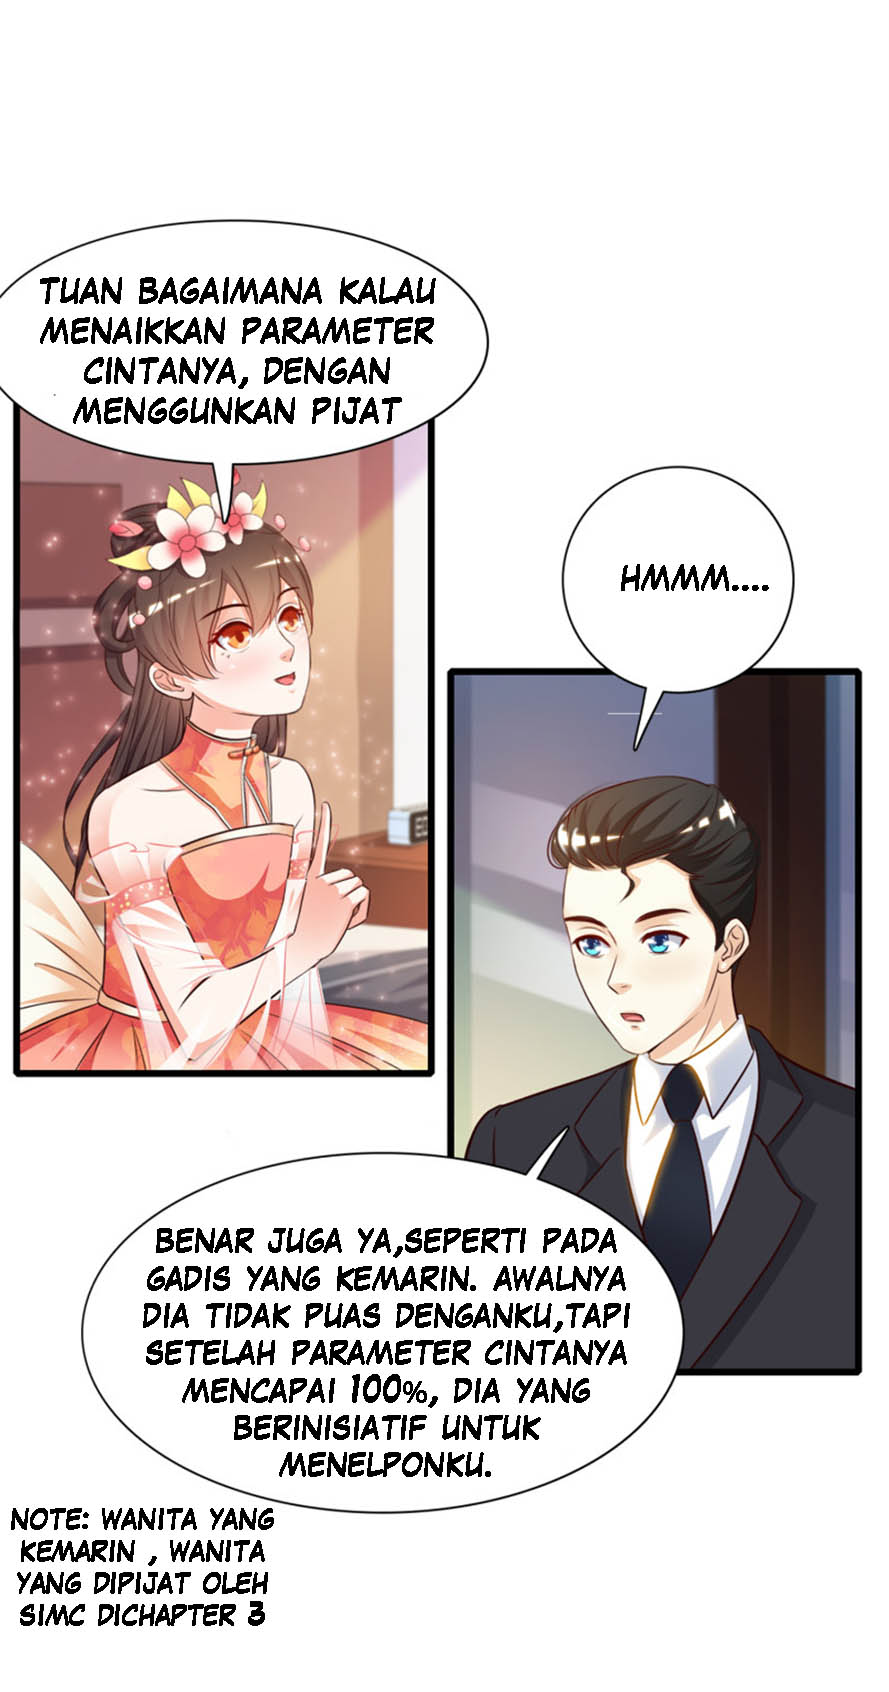 The Strongest Peach Blossom Chapter 7